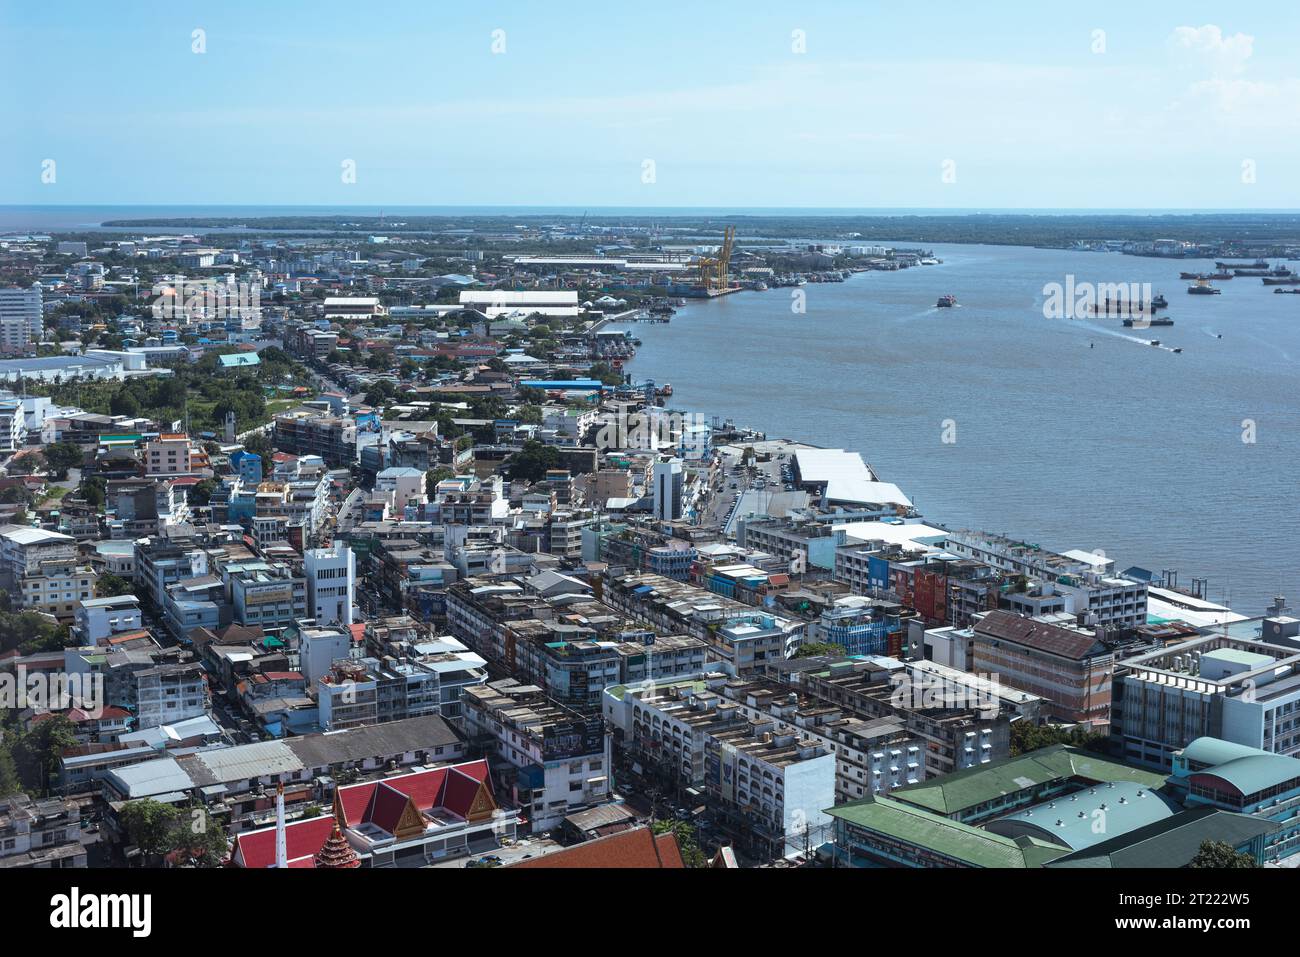 Samut Prakan, Thailand - September 3, 2023: a view of the city, the Chao Phraya River's mouth and Gulf of Thailand on horizon from Samut Prakan Tower. Stock Photo